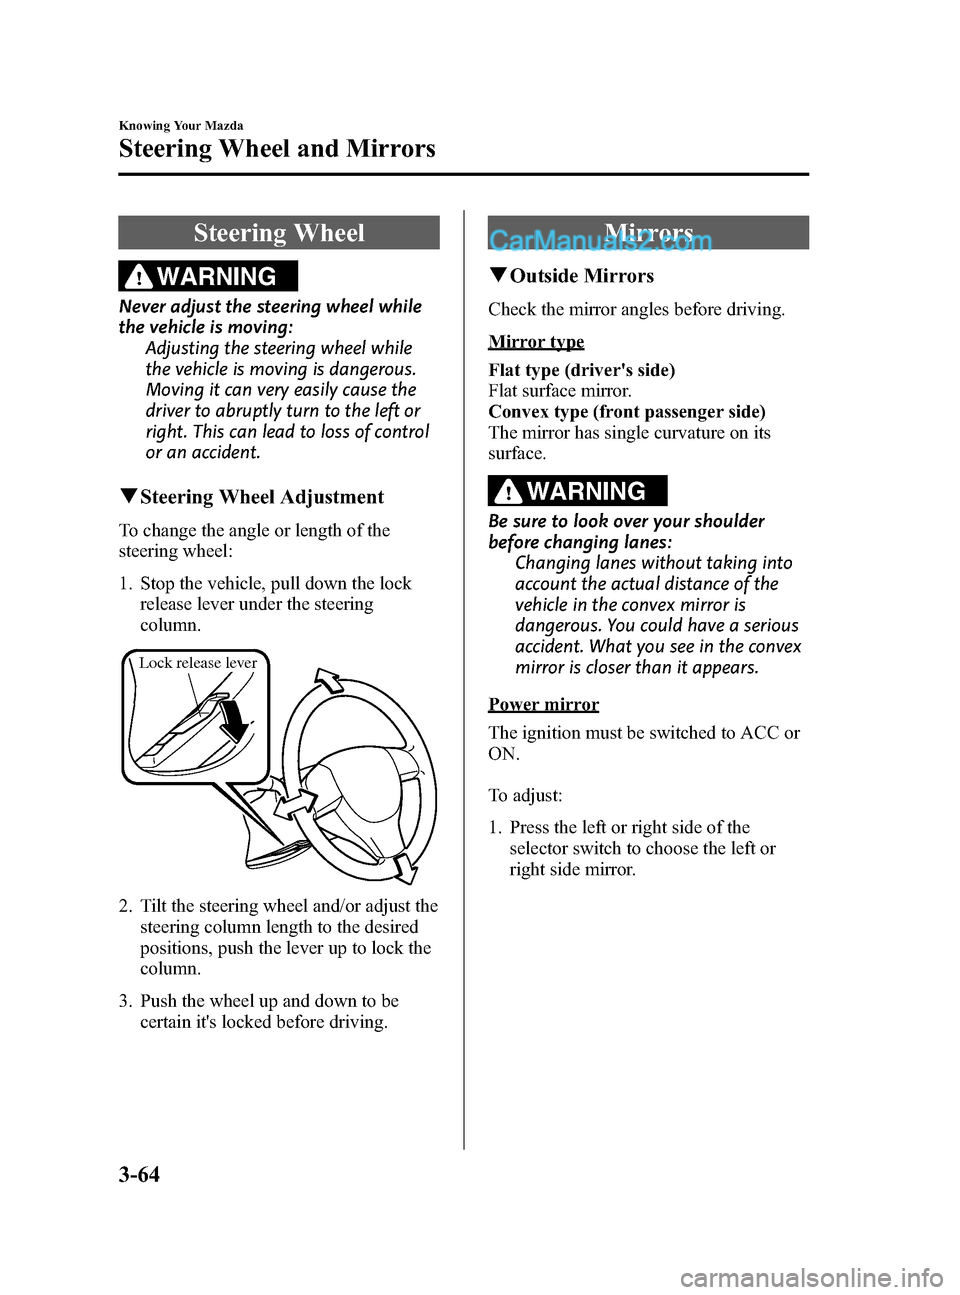 MAZDA MODEL CX-9 2015  Owners Manual (in English) Black plate (152,1)
Steering Wheel
WARNING
Never adjust the steering wheel while
the vehicle is moving:Adjusting the steering wheel while
the vehicle is moving is dangerous.
Moving it can very easily 